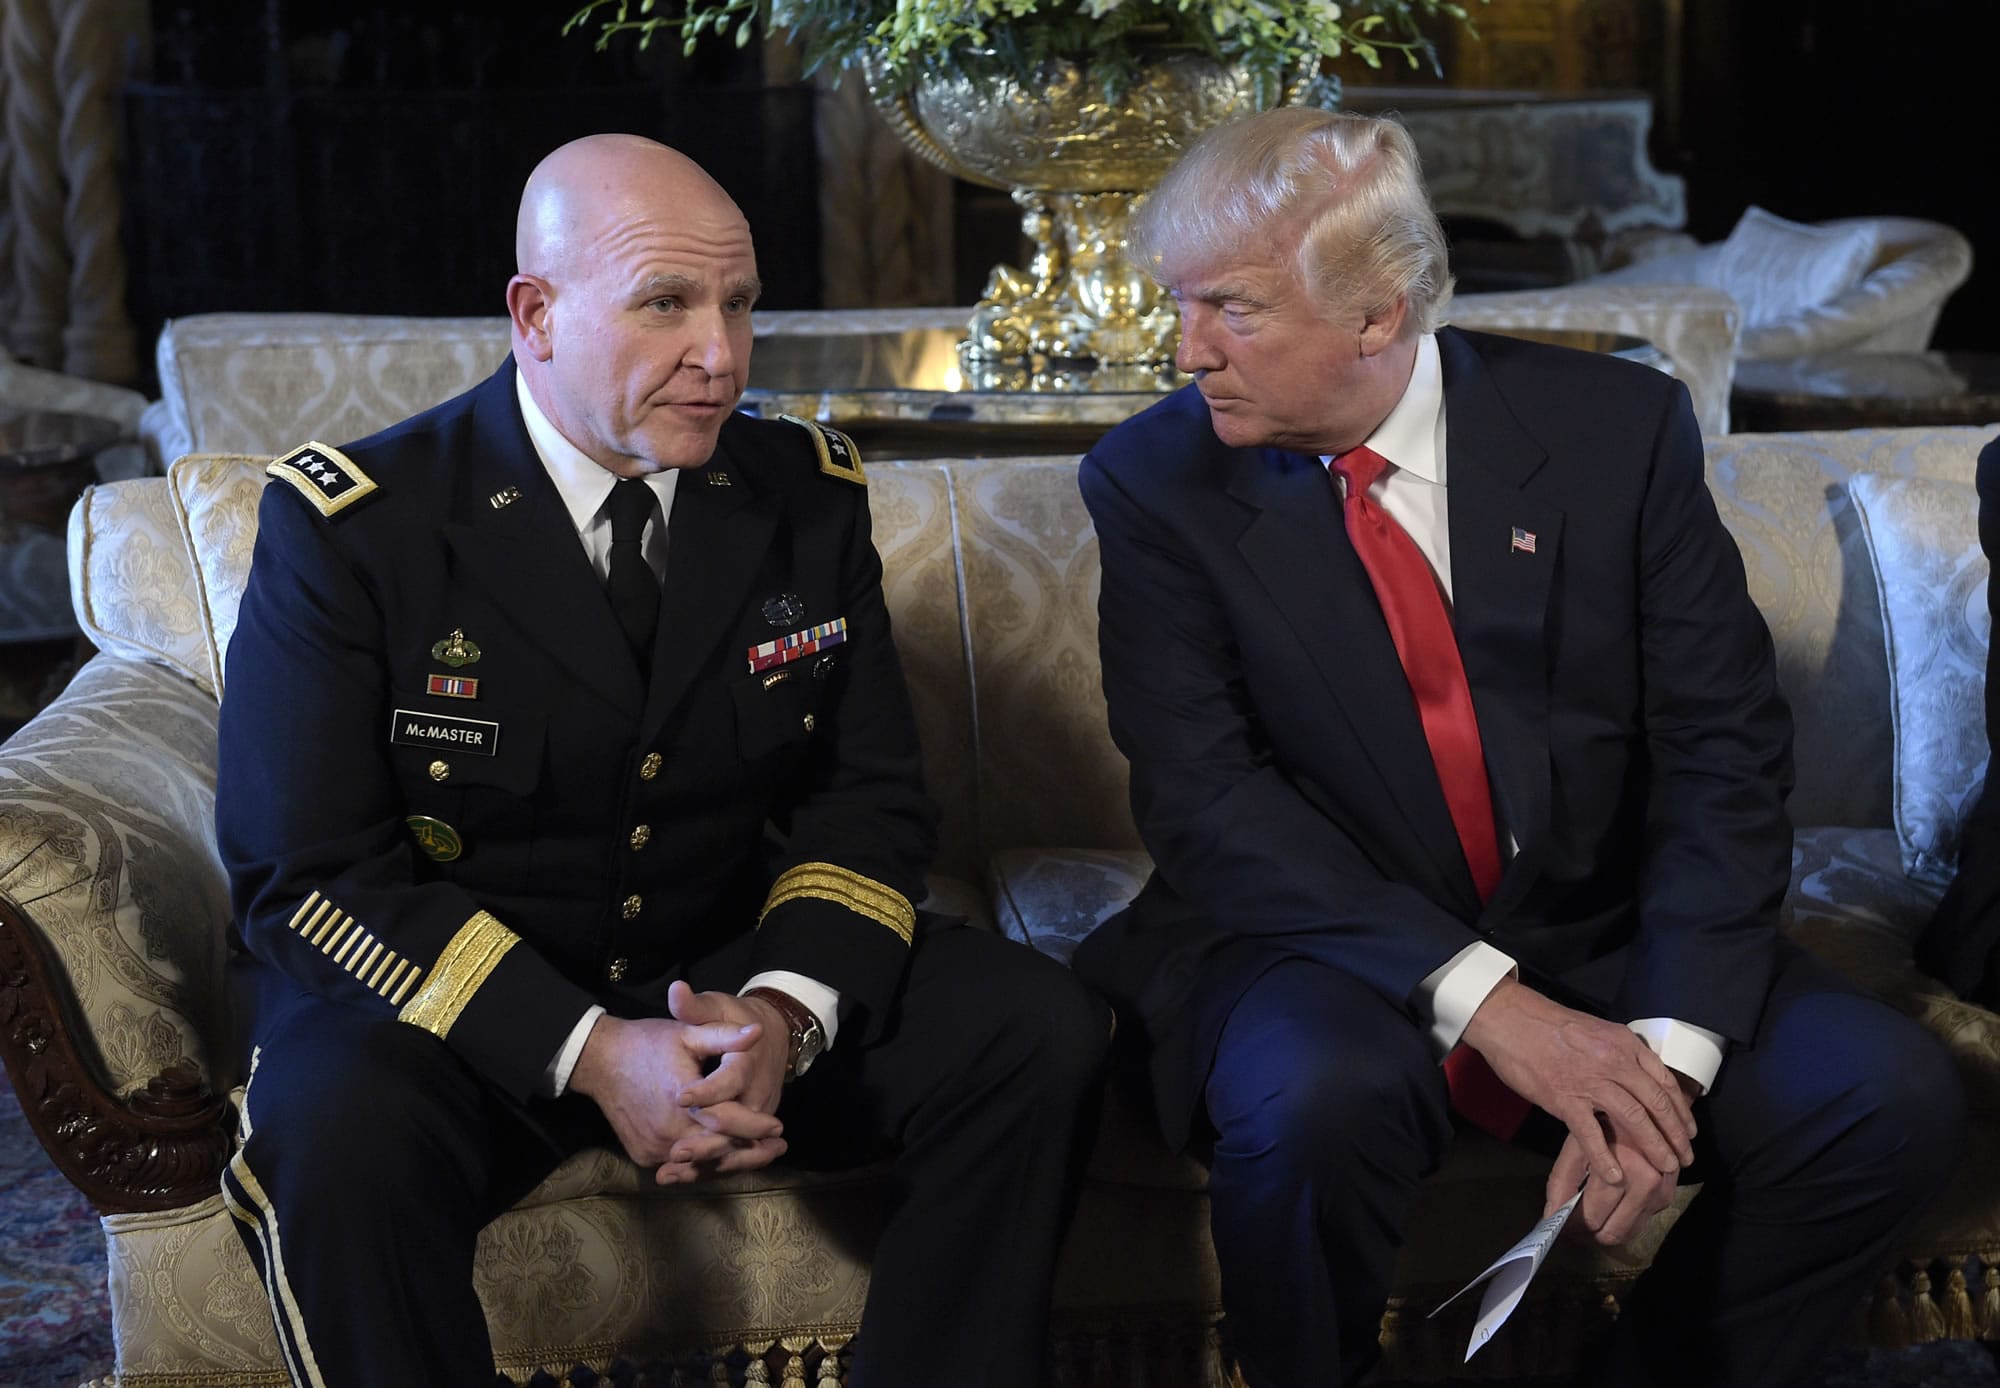 President Donald Trump, right, listens as Army Lt. Gen. H.R. McMaster, left, talks at Trump's Mar-a-Lago estate in Palm Beach, Fla., Monday, Feb. 20, 2017, where Trump announced that McMaster will be the new national security adviser.